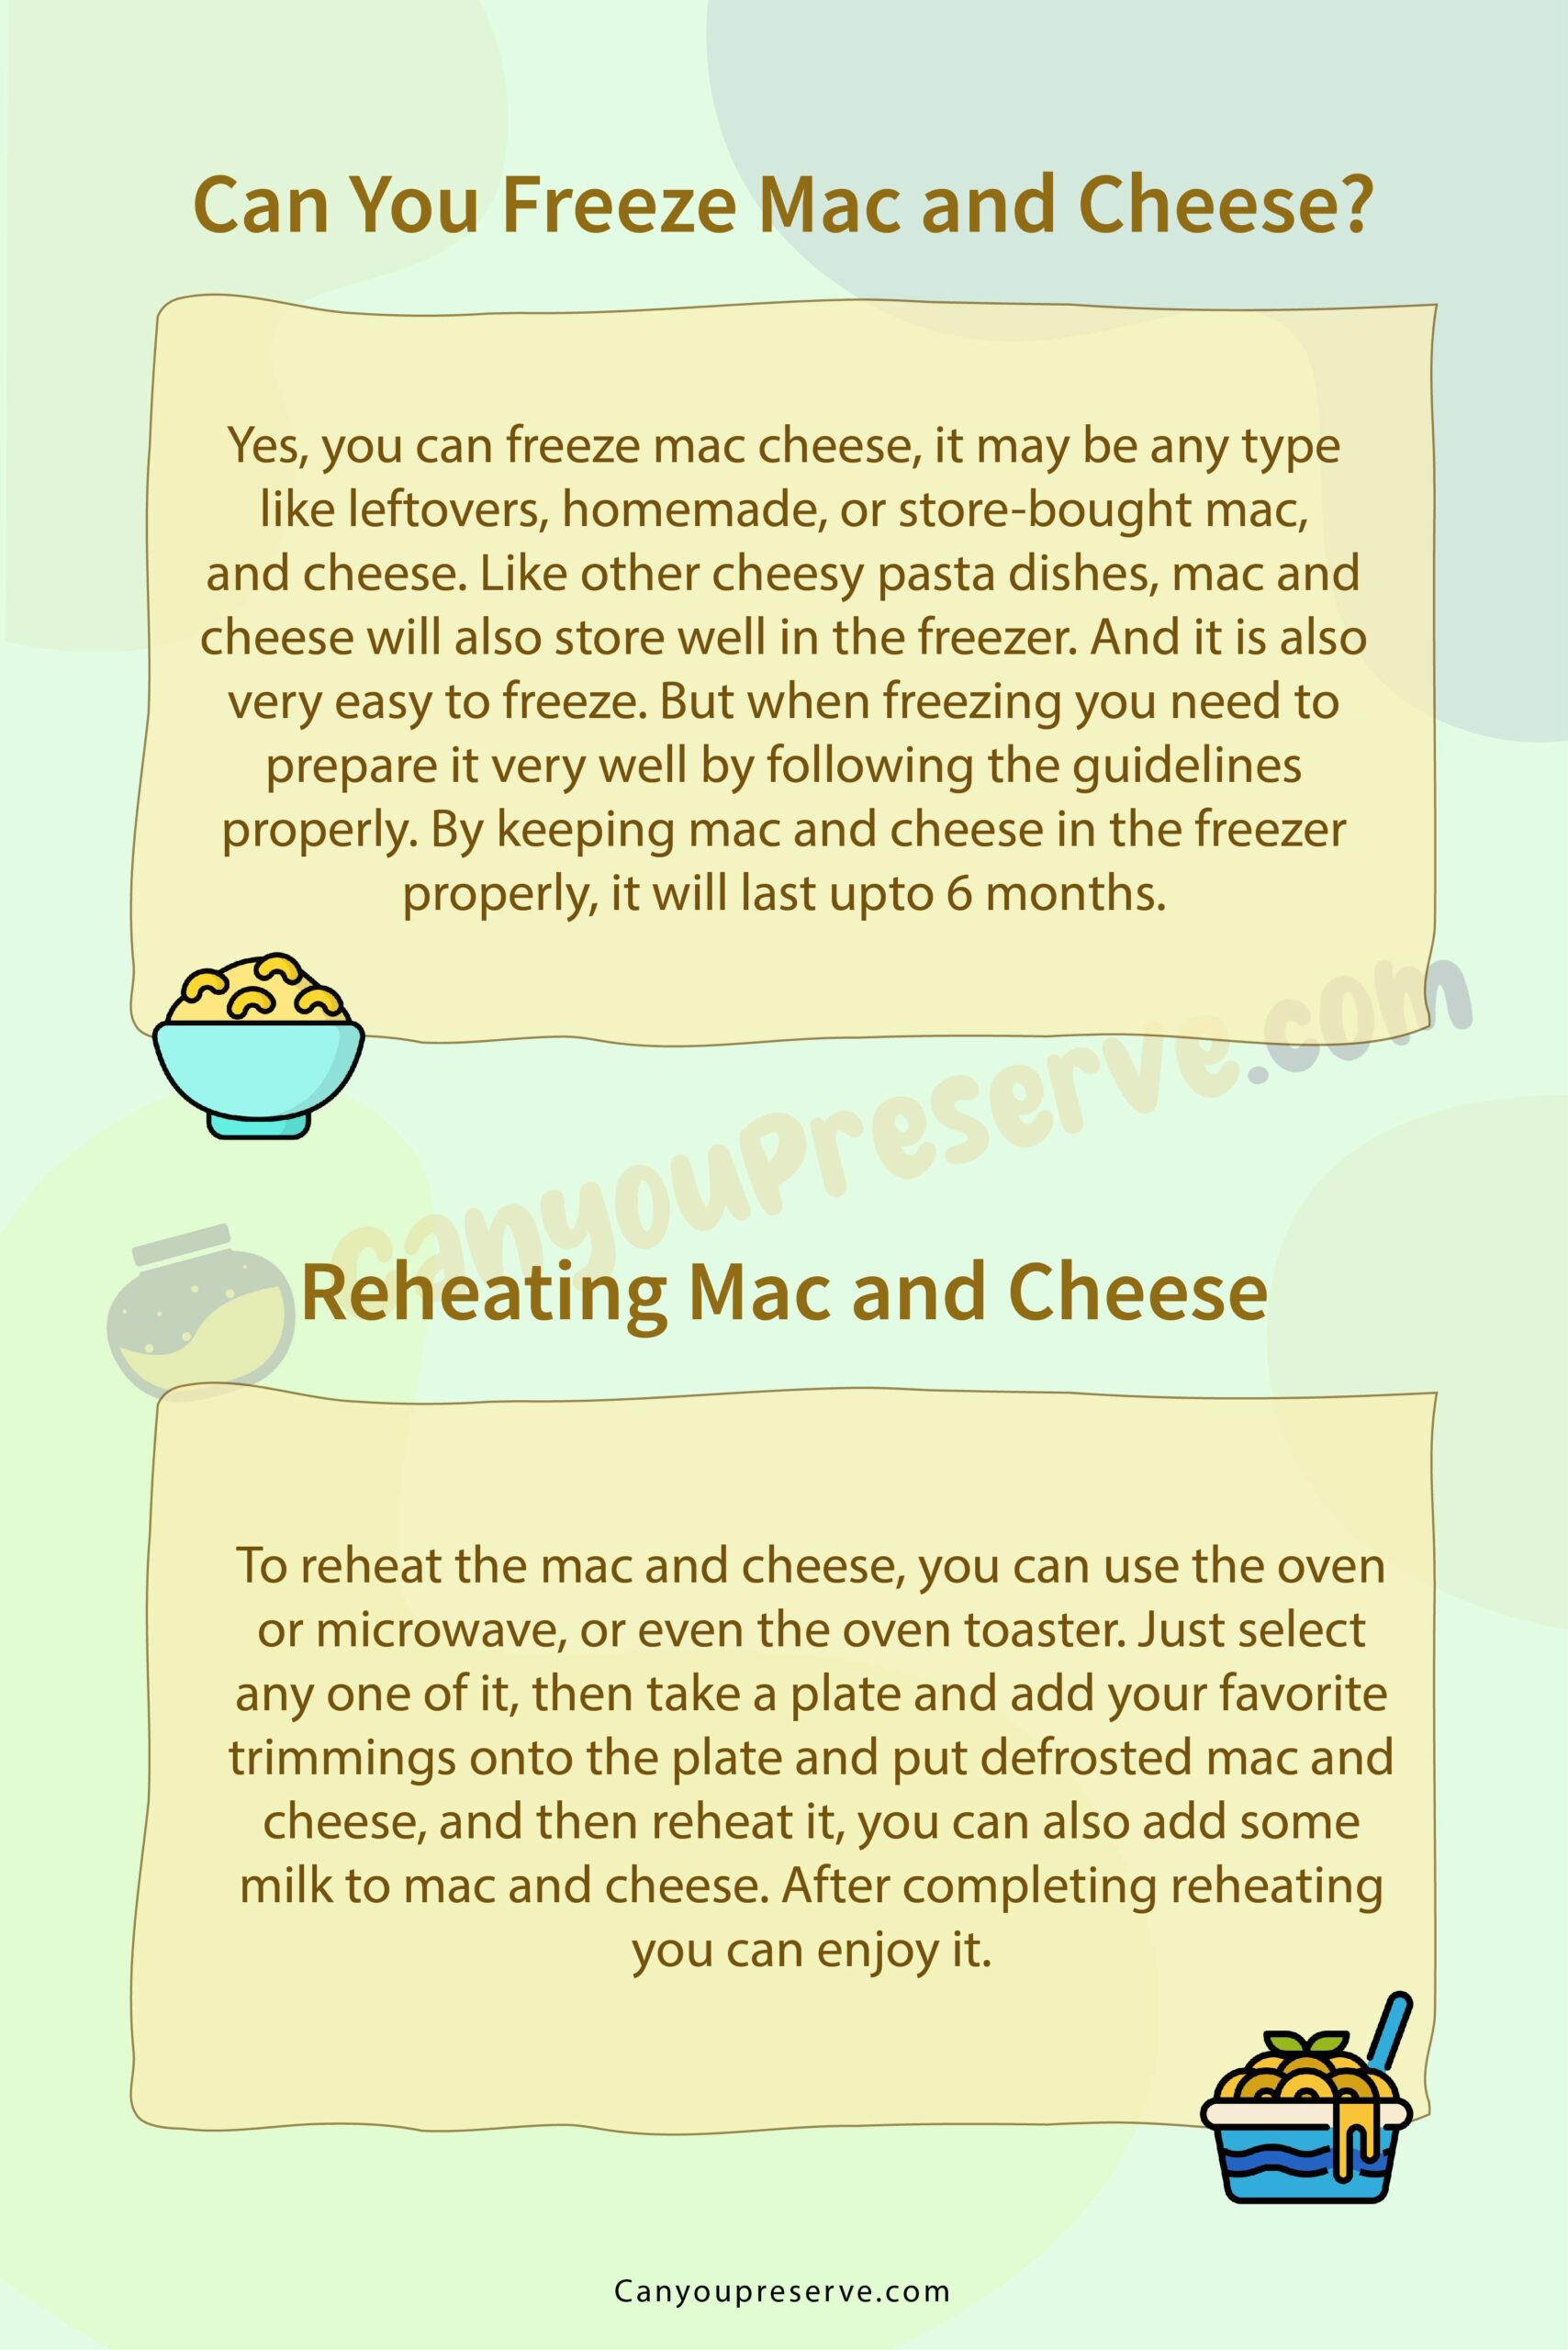 Can You Freeze Mac and Cheese